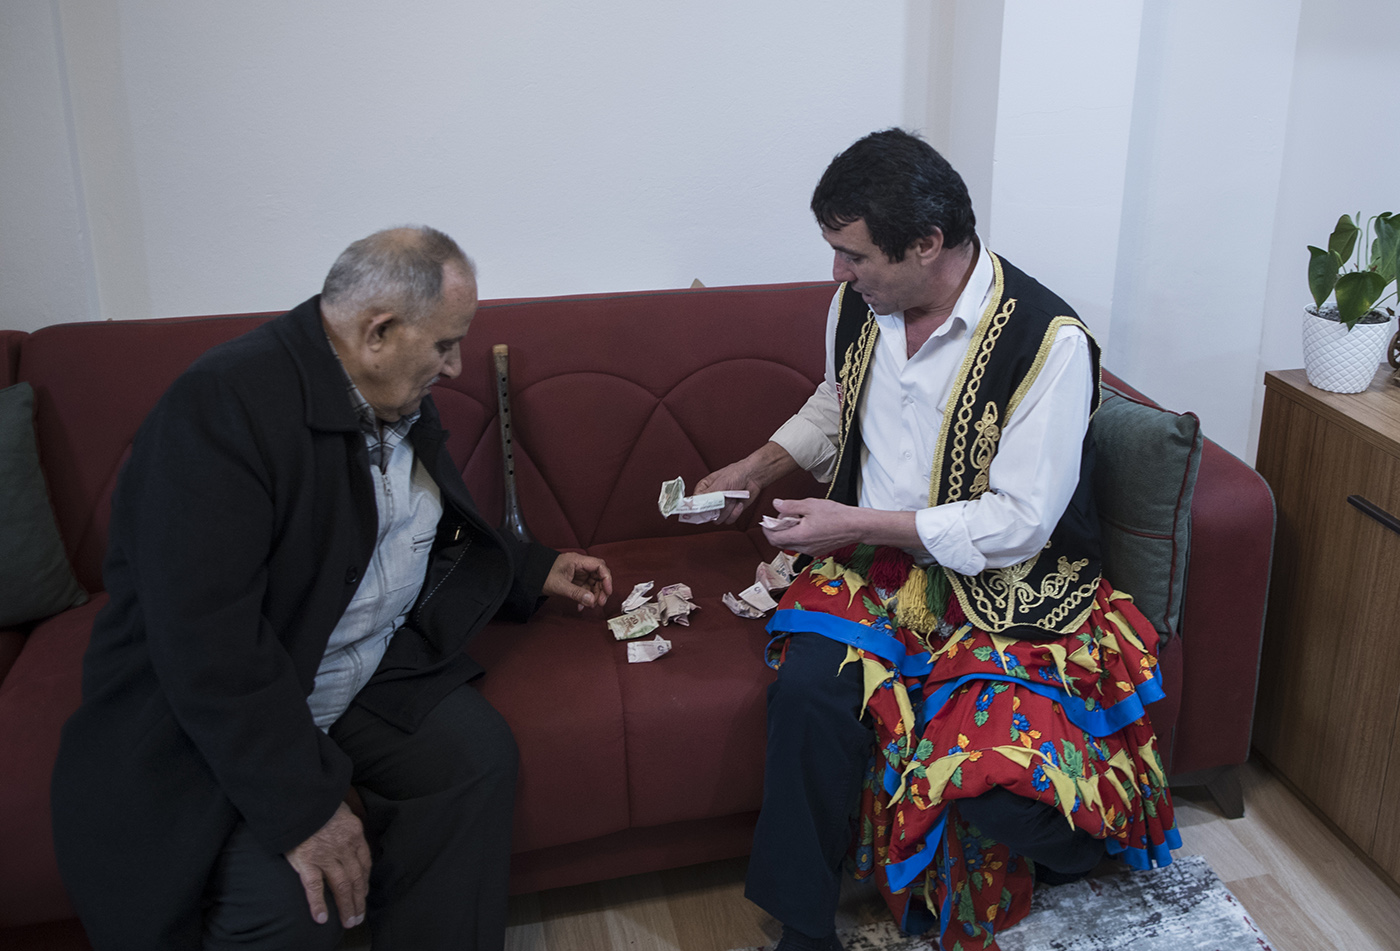 Osman Celik (R) counts money for share with musicians after a entertainment of a boy which will do soon compulsory military service in Istanbul, Turkey, 01 December 2019. 